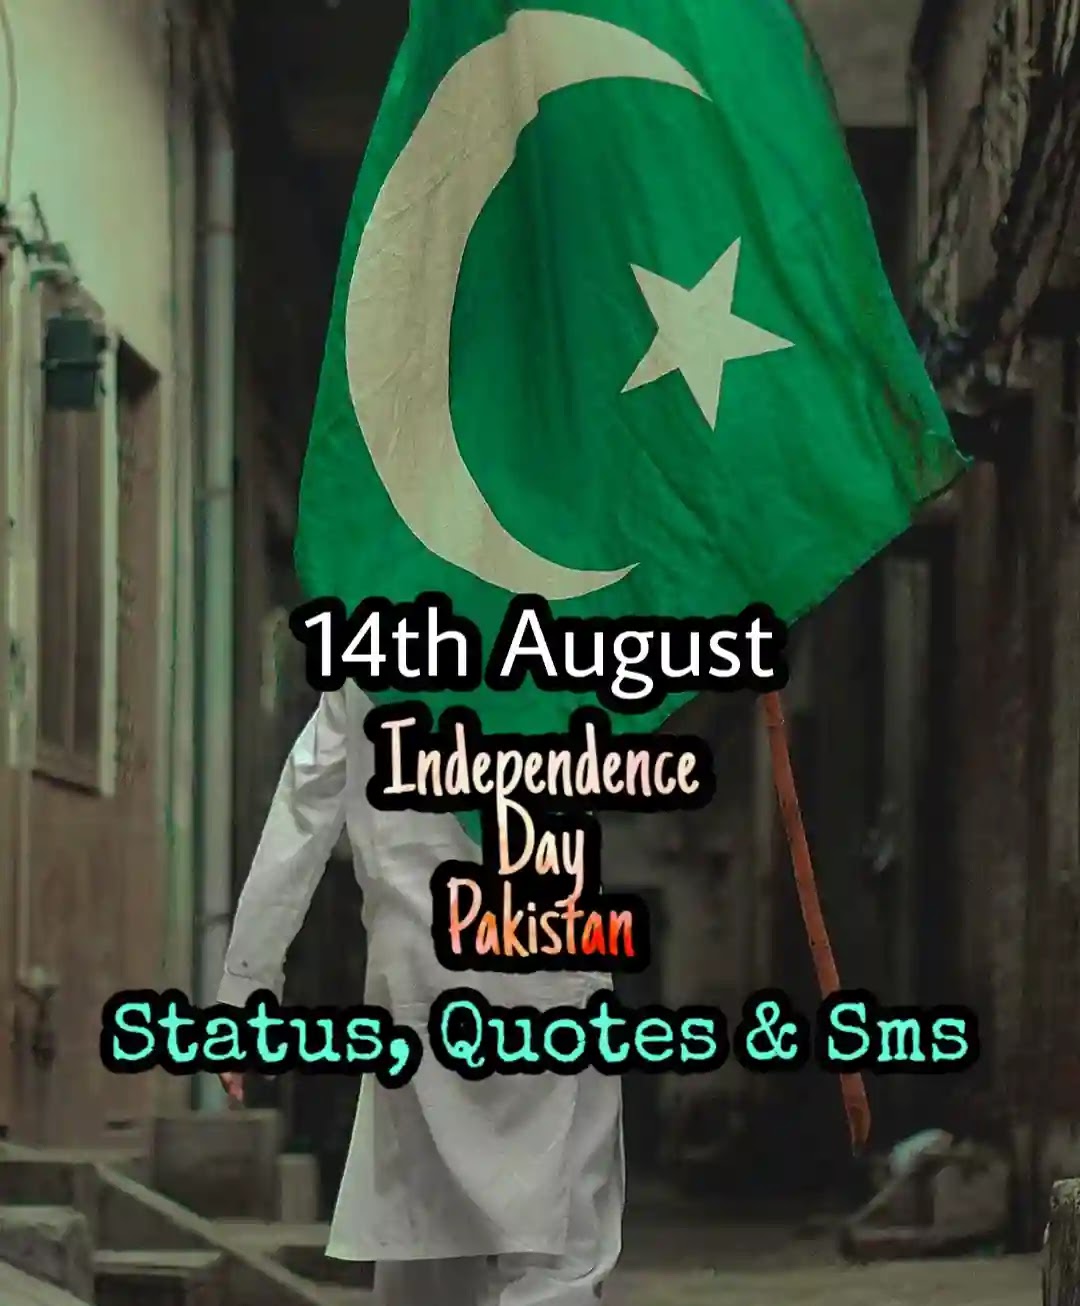 10 Perfect Pakistan Independence Day SMS And WhatsApp Messages